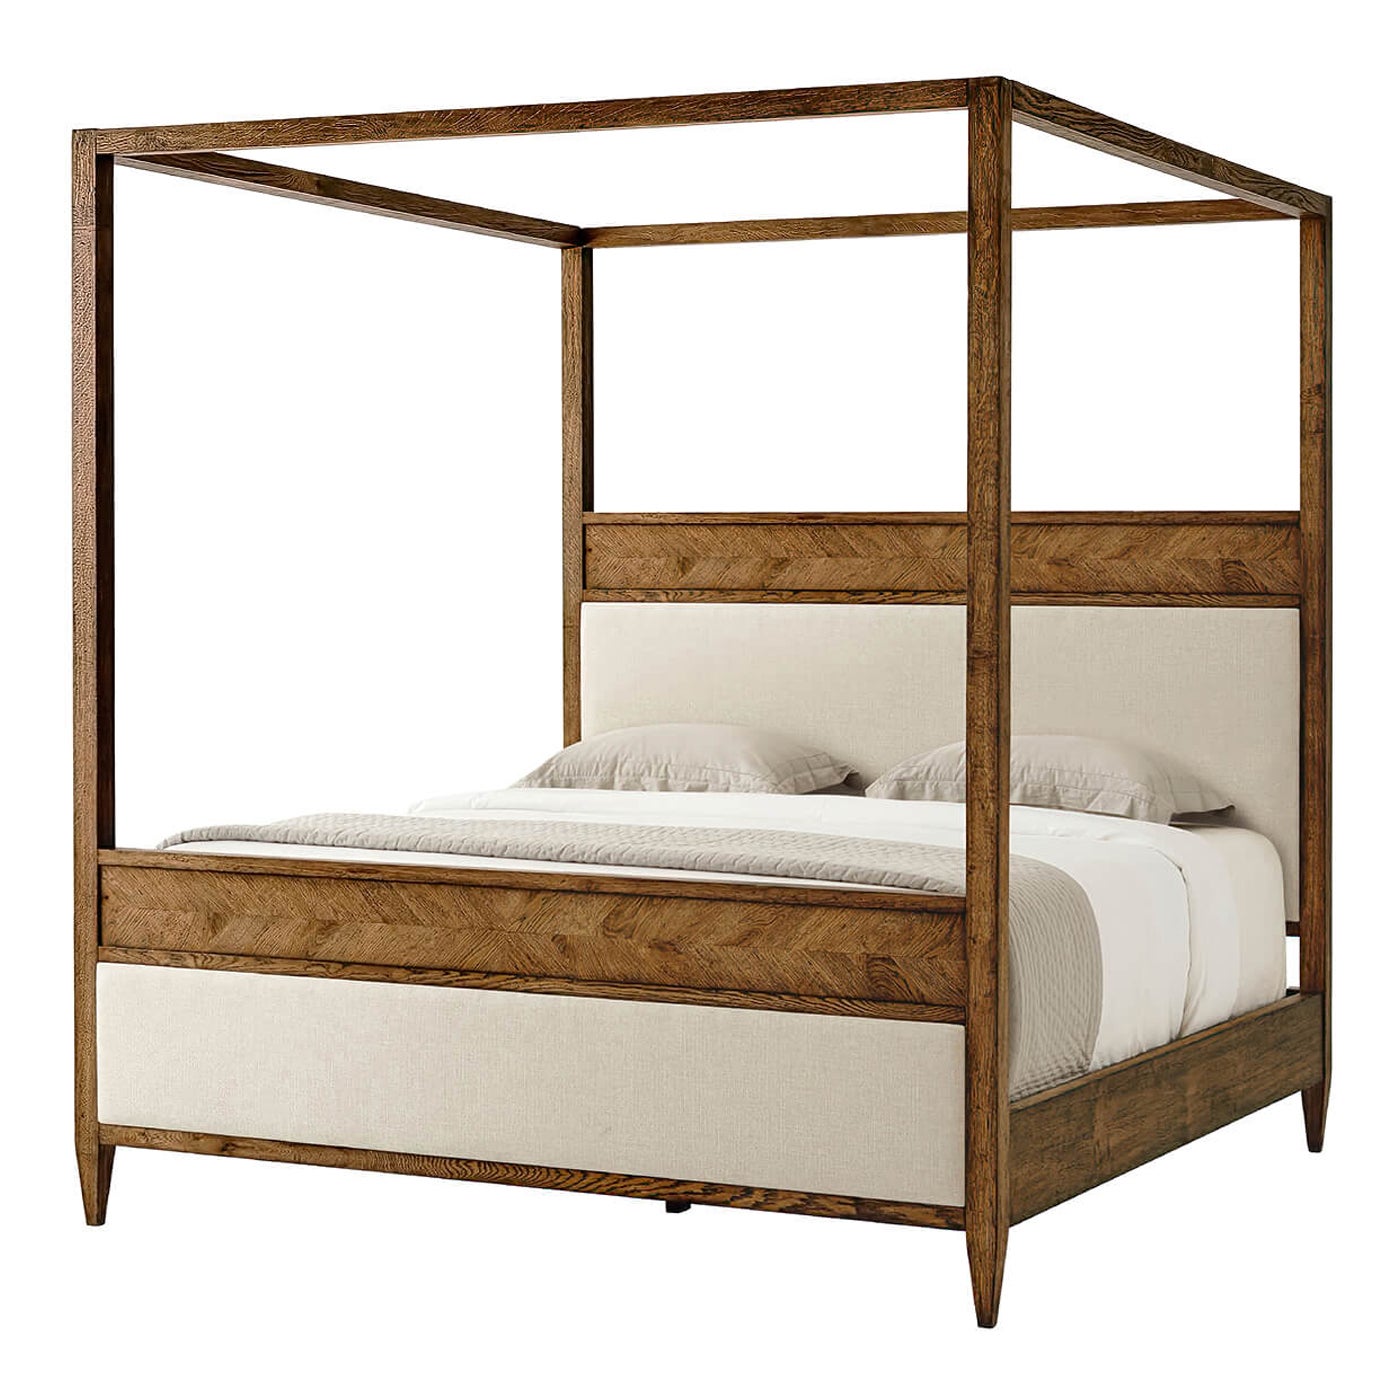 Modern Rustic Canopy California King Bed